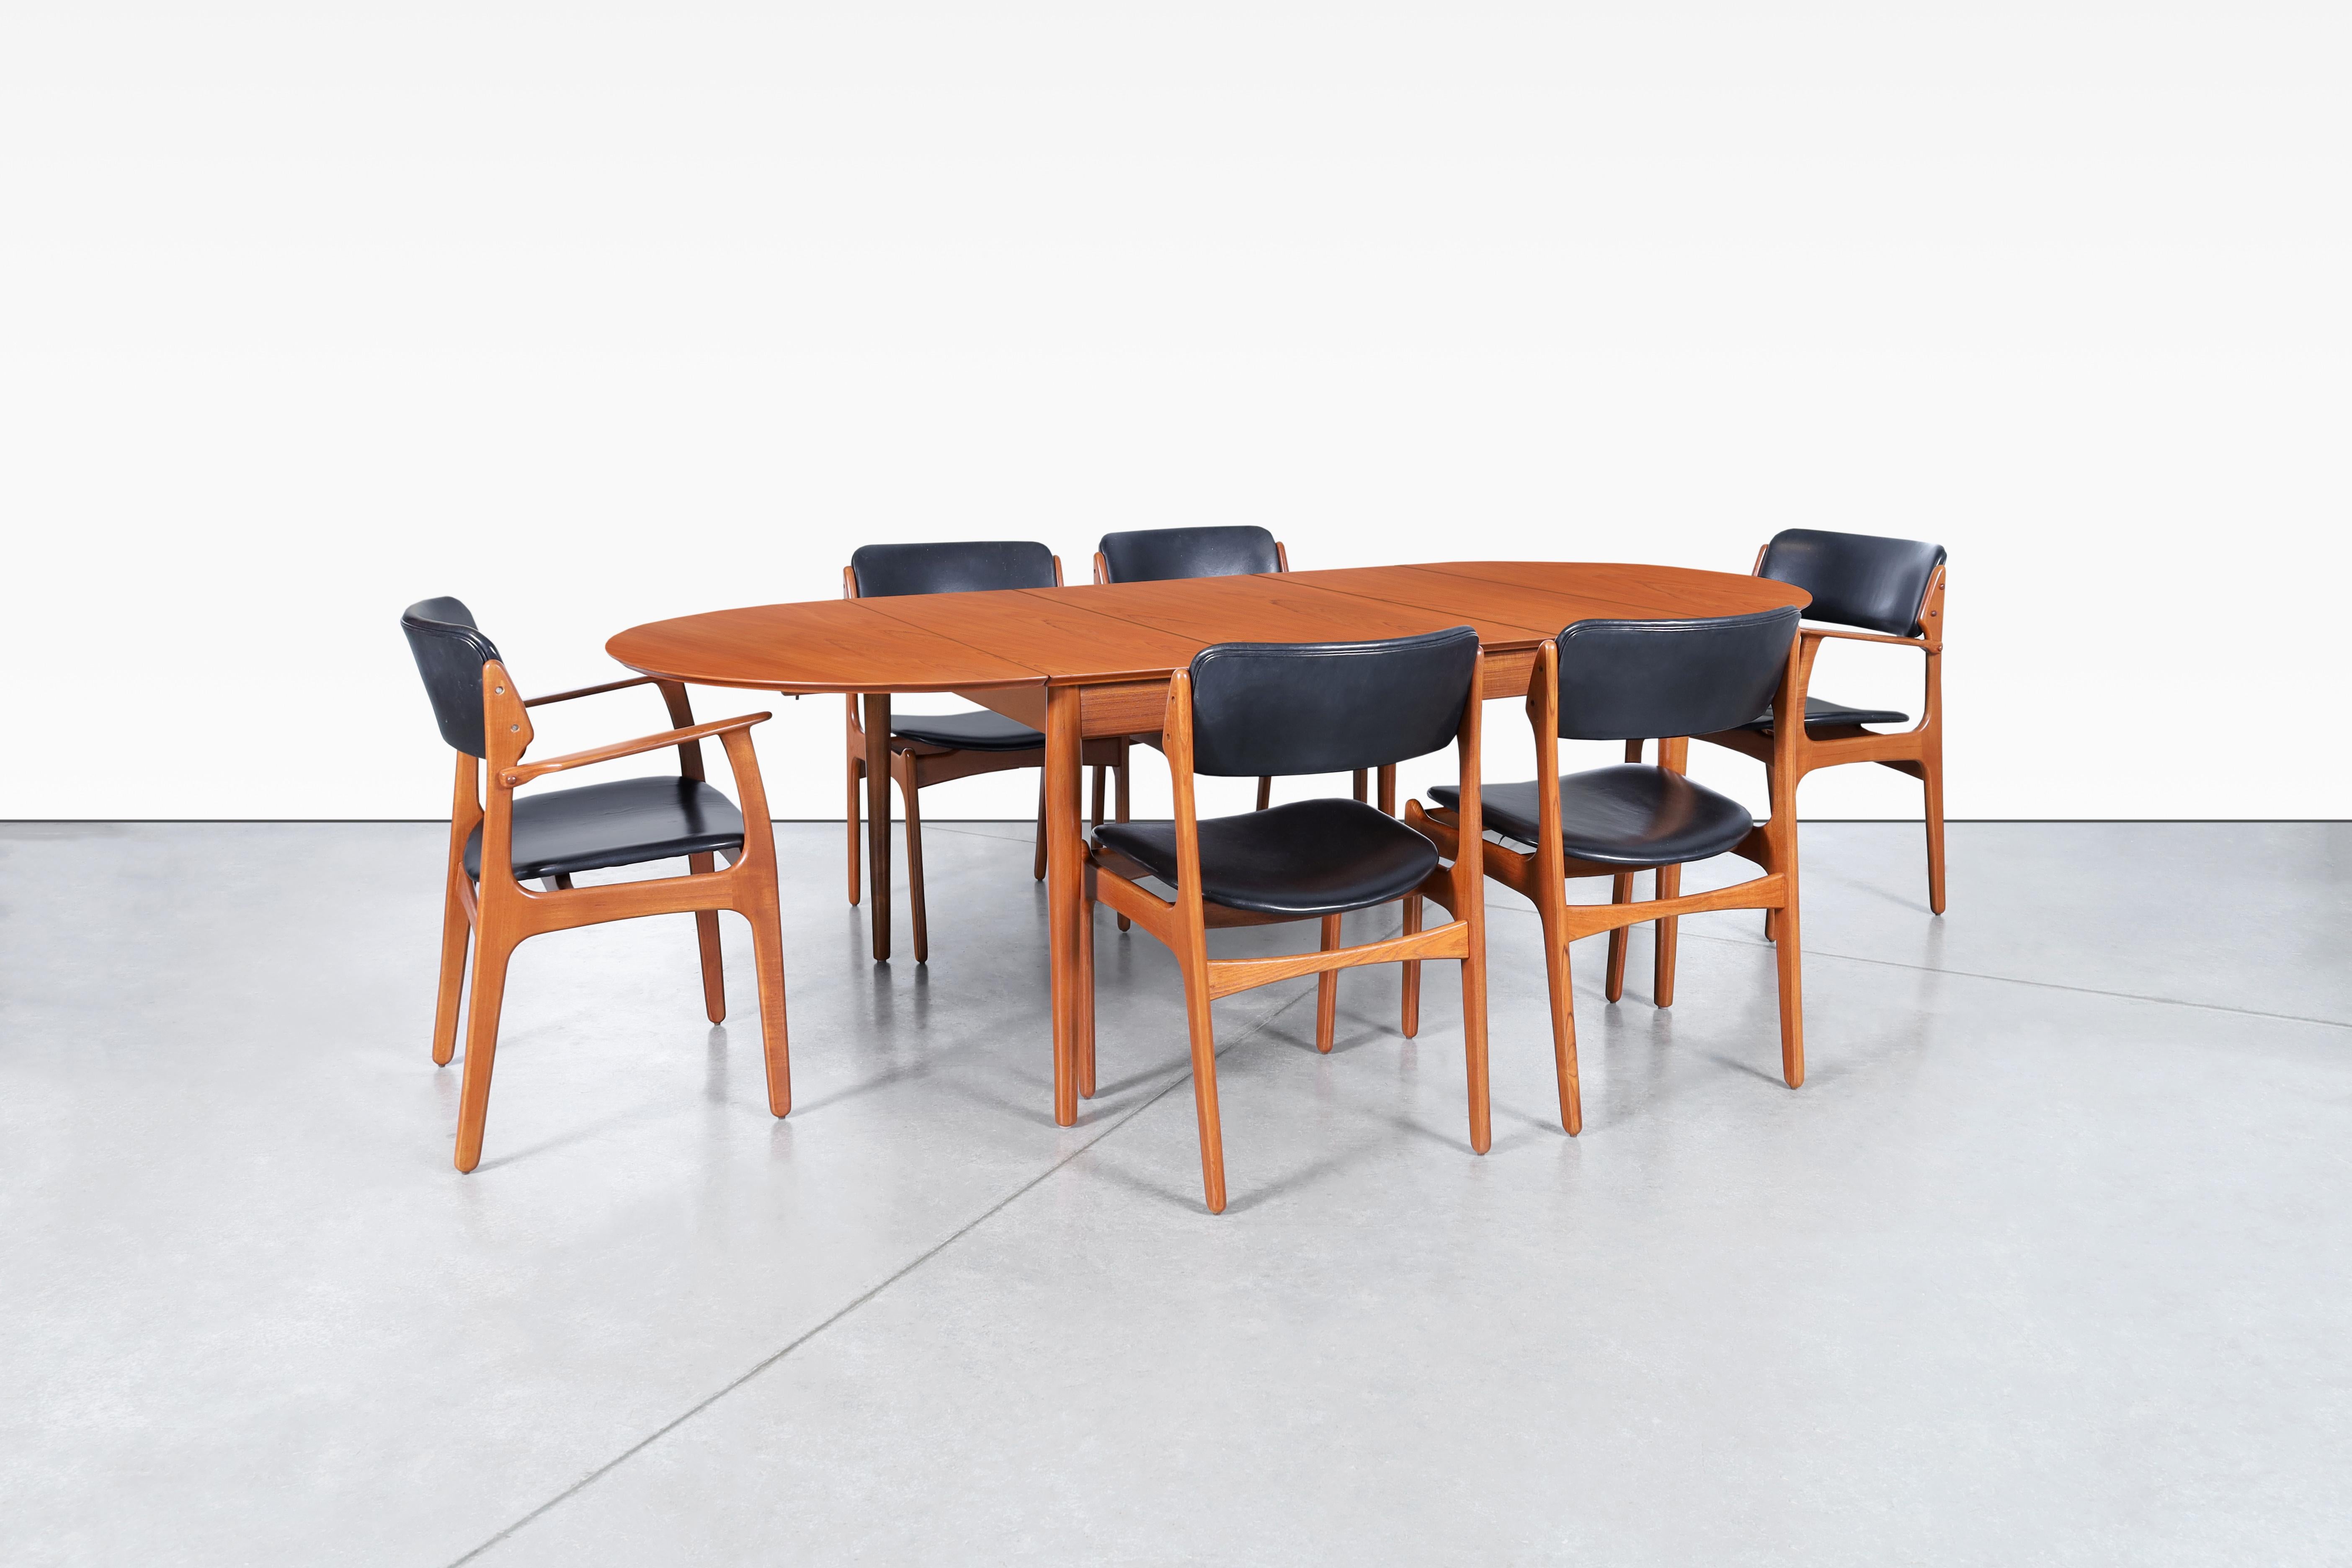 Transform your dining space into a mid-century masterpiece with this stunning dining room set that combines iconic design with exquisite craftsmanship. This set includes six dining chairs and a Danish modern teak dining table, designed by Erik Buch